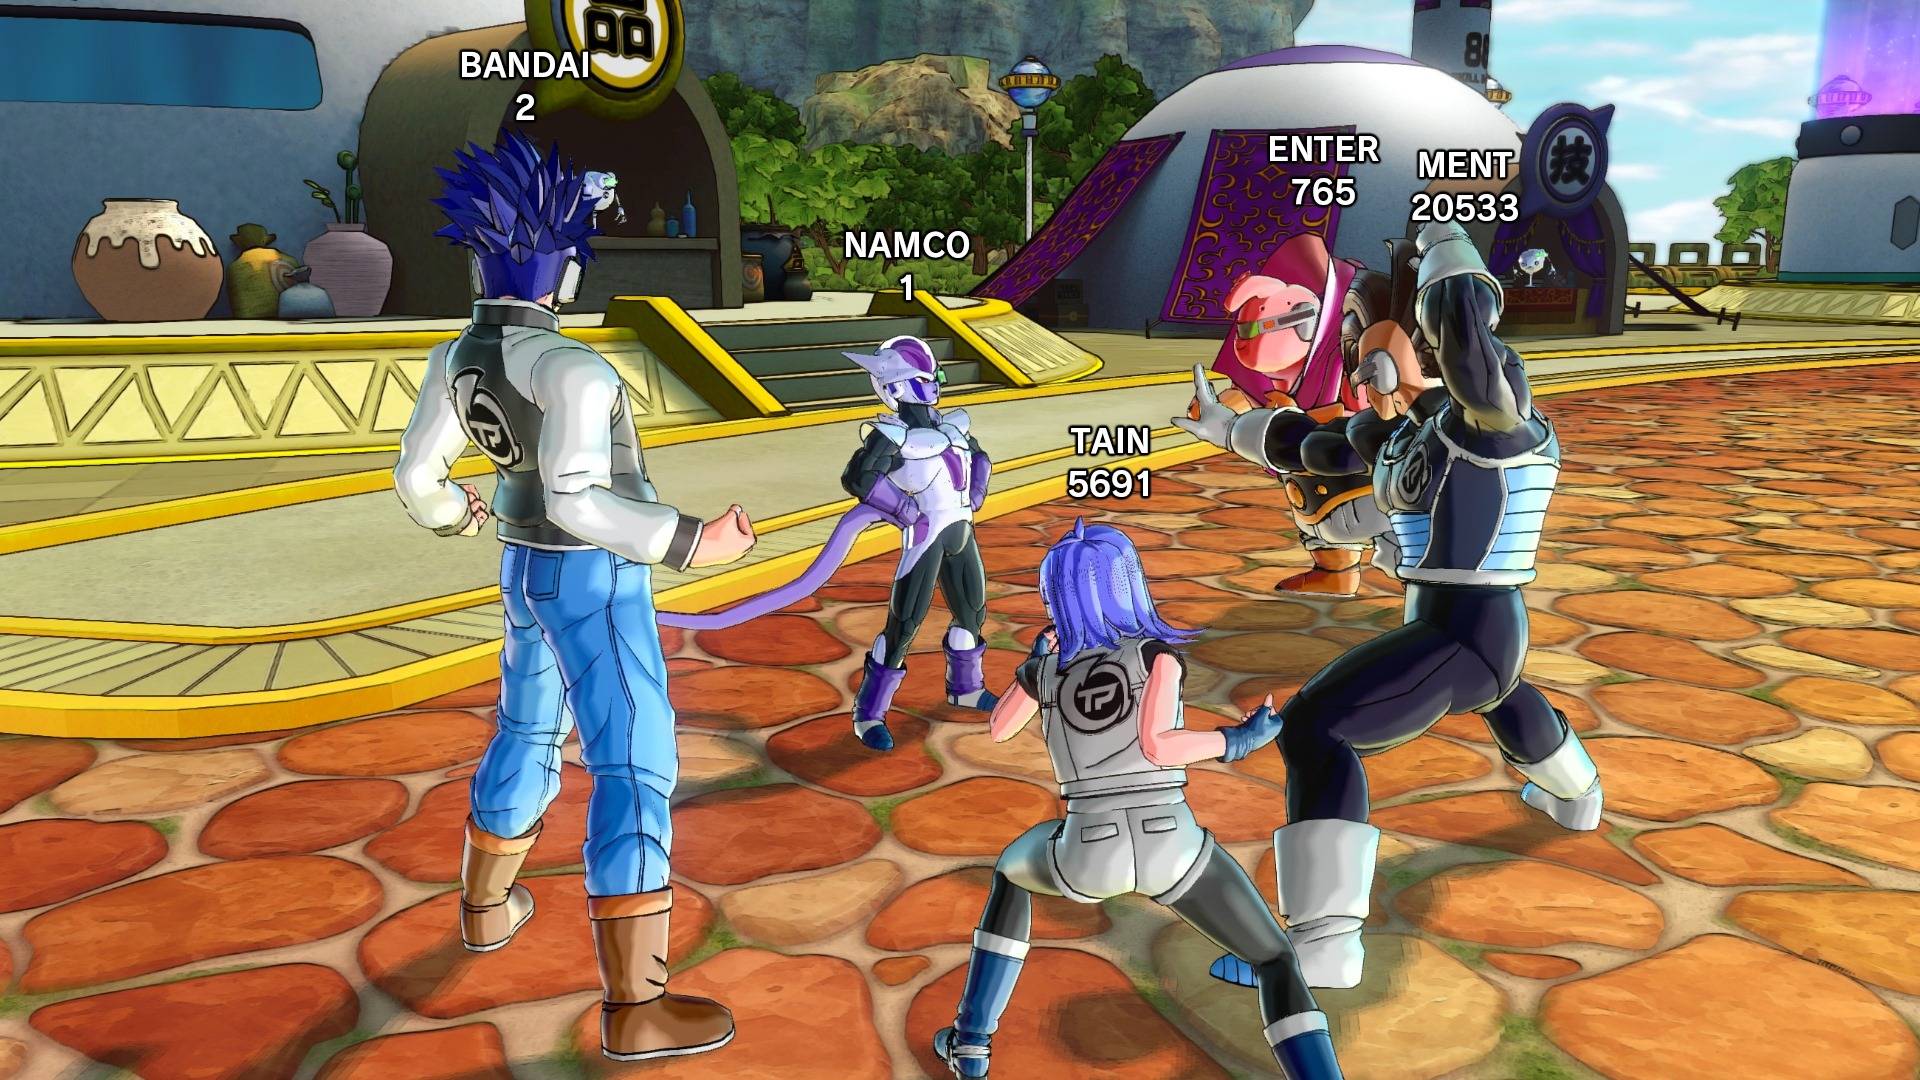 Best Dragon Ball games: several characters dressed in z warrior outfits 